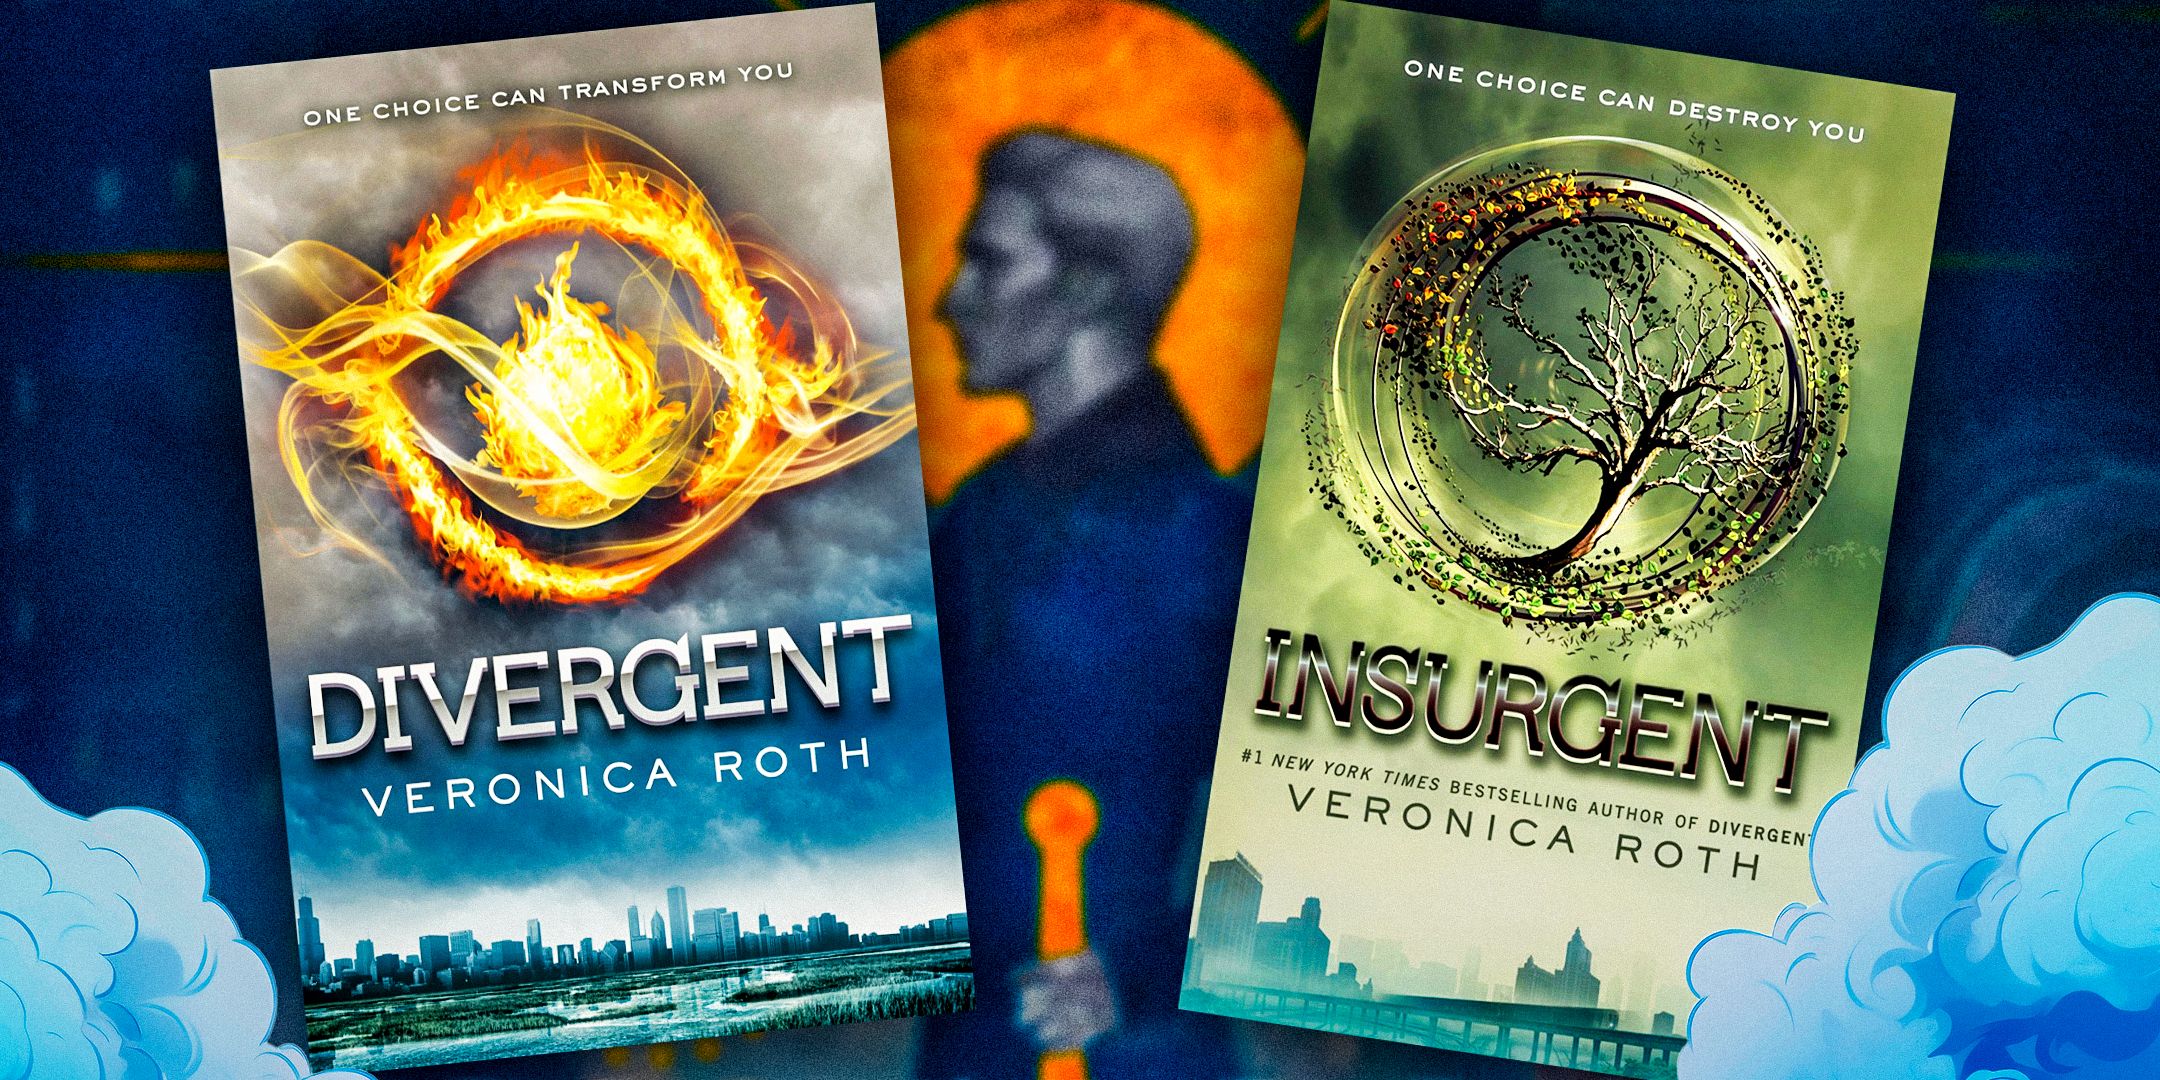 Veronica Roth’s New Fantasy Book Deserves The Divergent Treatment